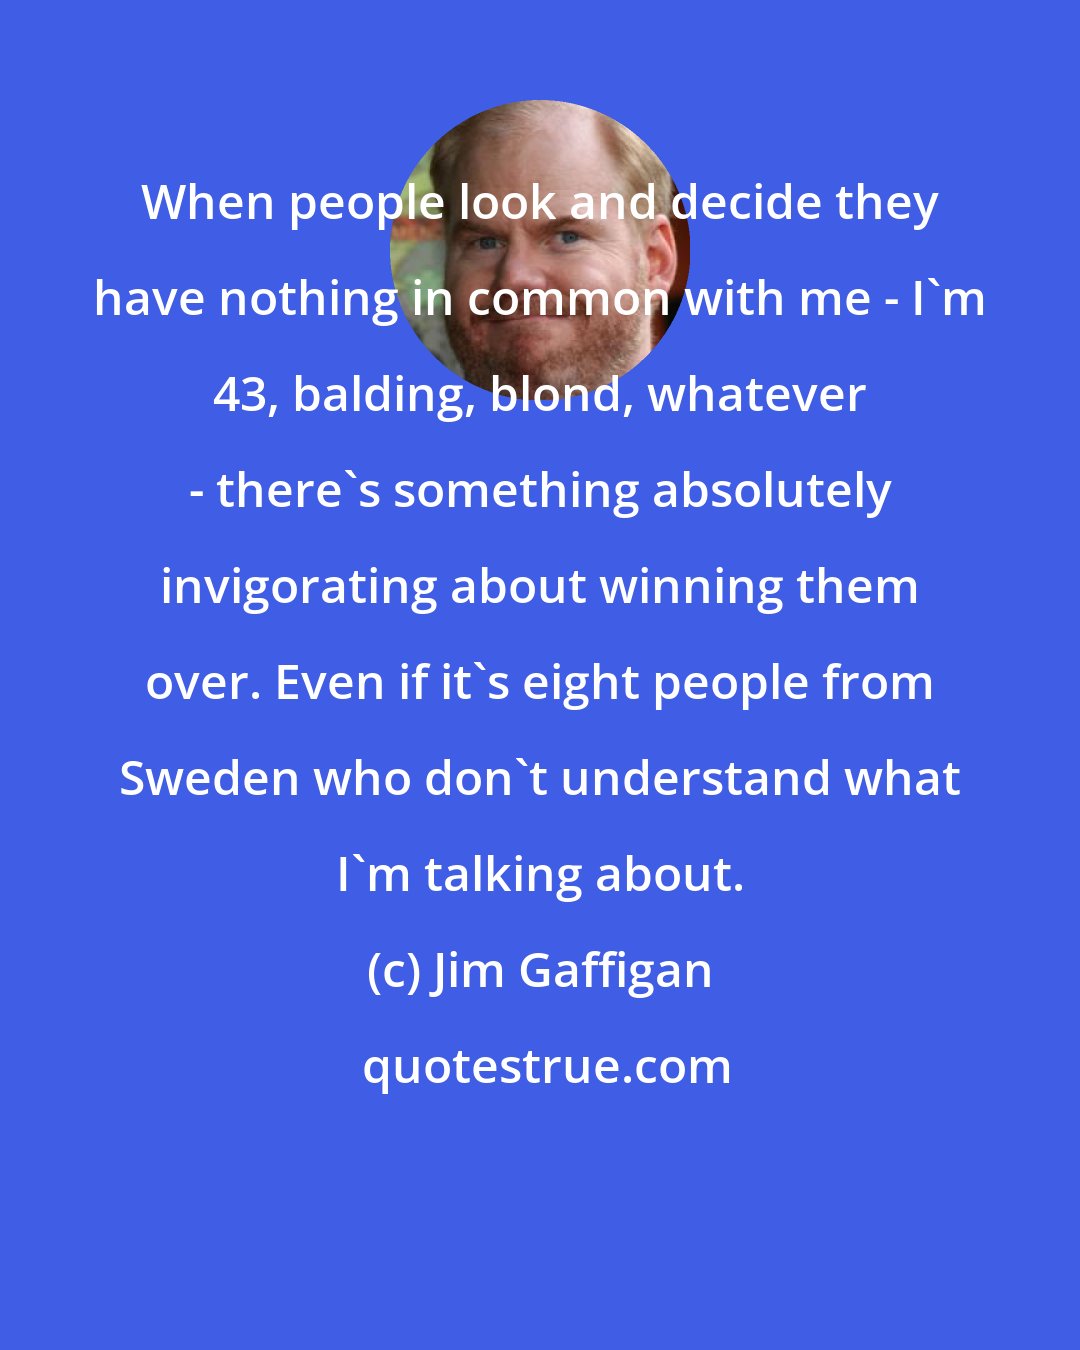 Jim Gaffigan: When people look and decide they have nothing in common with me - I'm 43, balding, blond, whatever - there's something absolutely invigorating about winning them over. Even if it's eight people from Sweden who don't understand what I'm talking about.